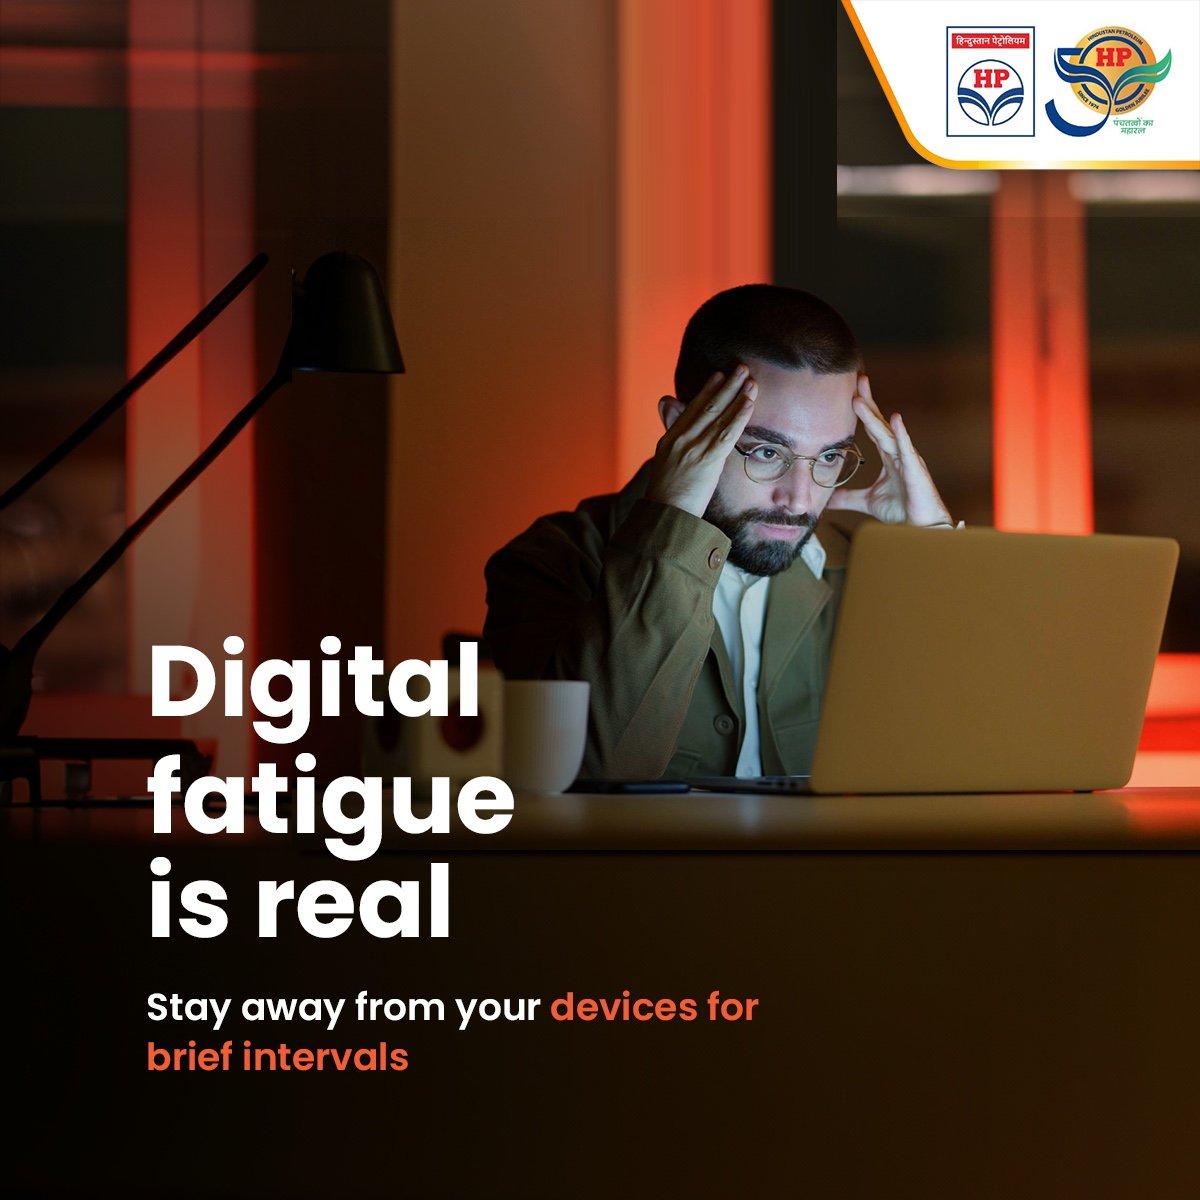 Extensive exposure to screens causes mental exhaustion. It also causes irritability and anxiety issues. Taking small breaks and engaging in activities like walking and light exercises help to keep our mind and body alert and active. #DigitalFatigue #MentalHealth